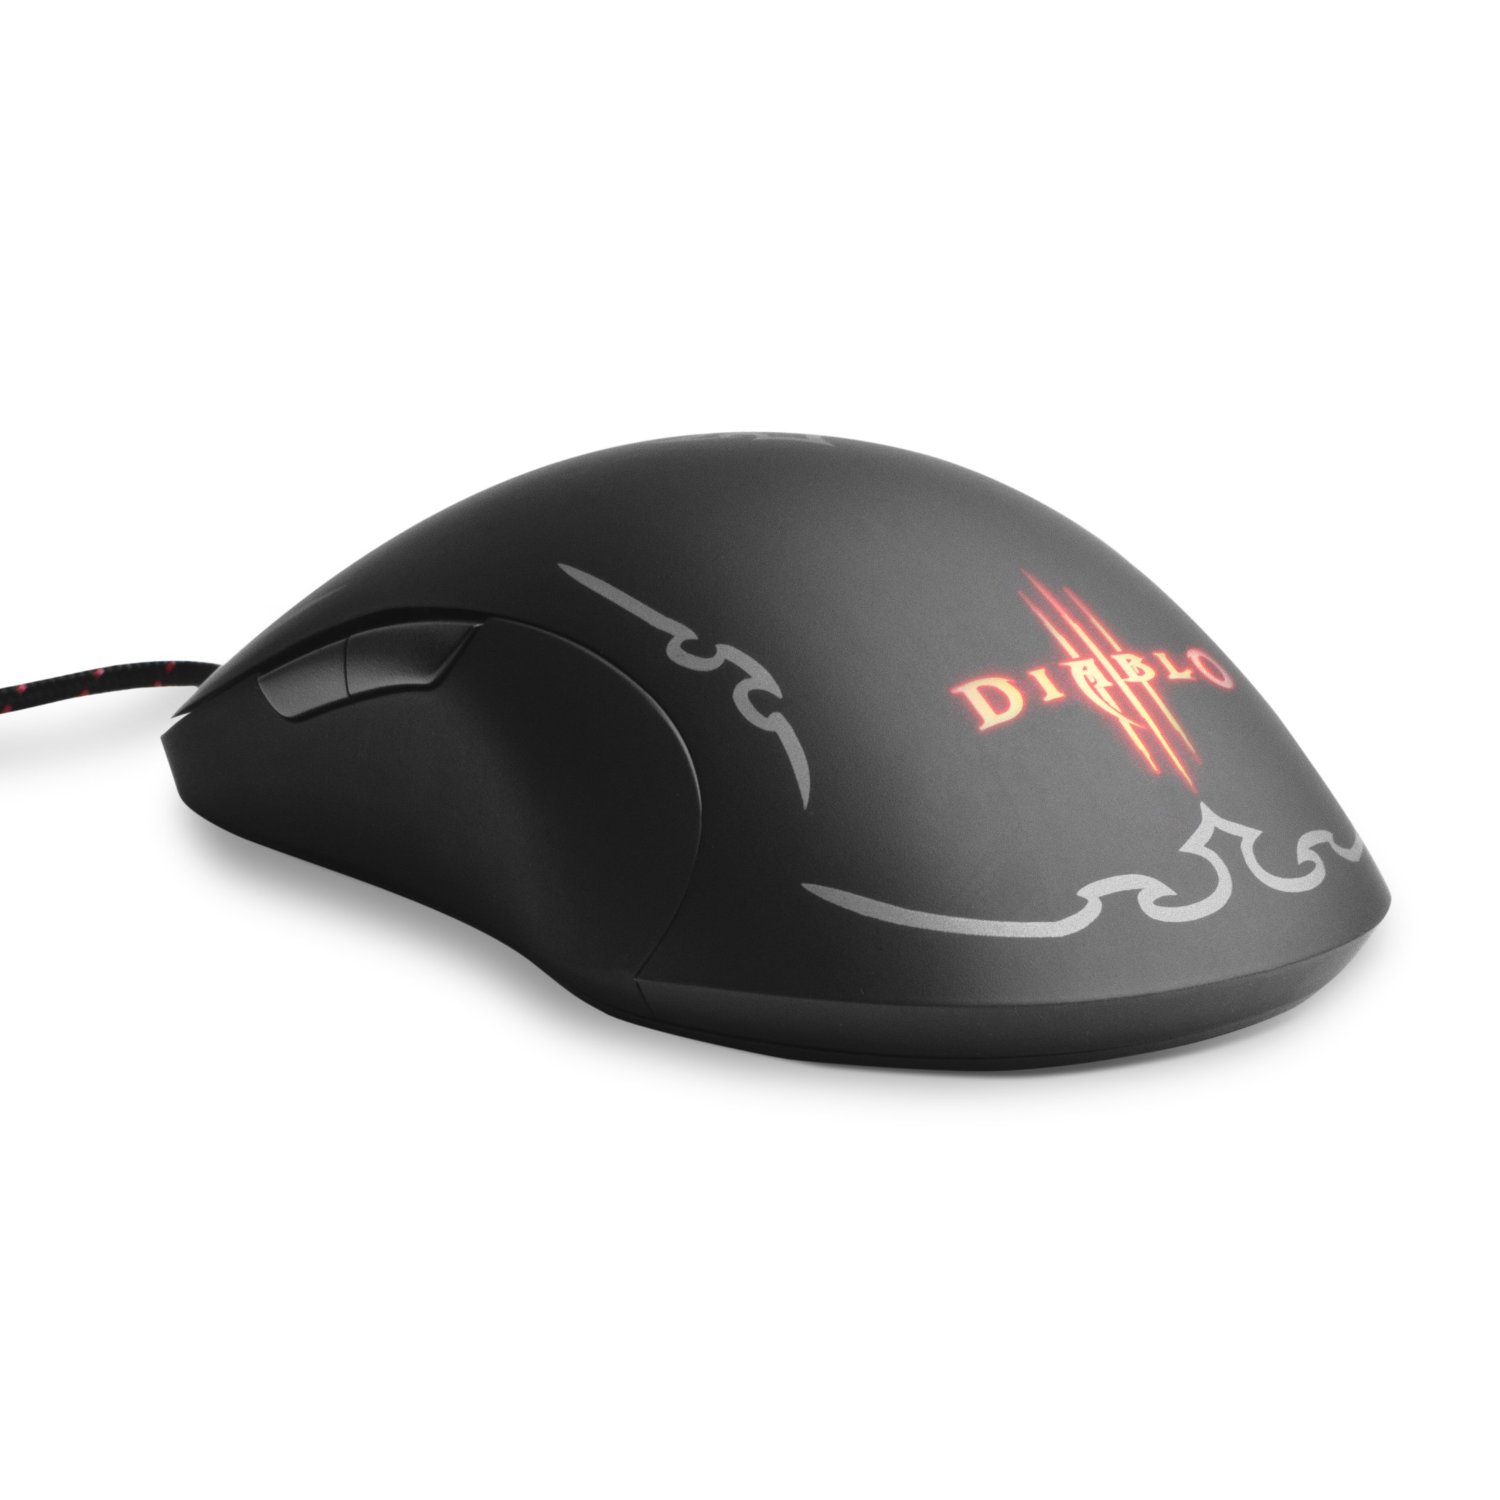 http://thetechjournal.com/wp-content/uploads/images/1202/1329590420-steelseries-diablo-iii-gaming-mouse-6.jpg